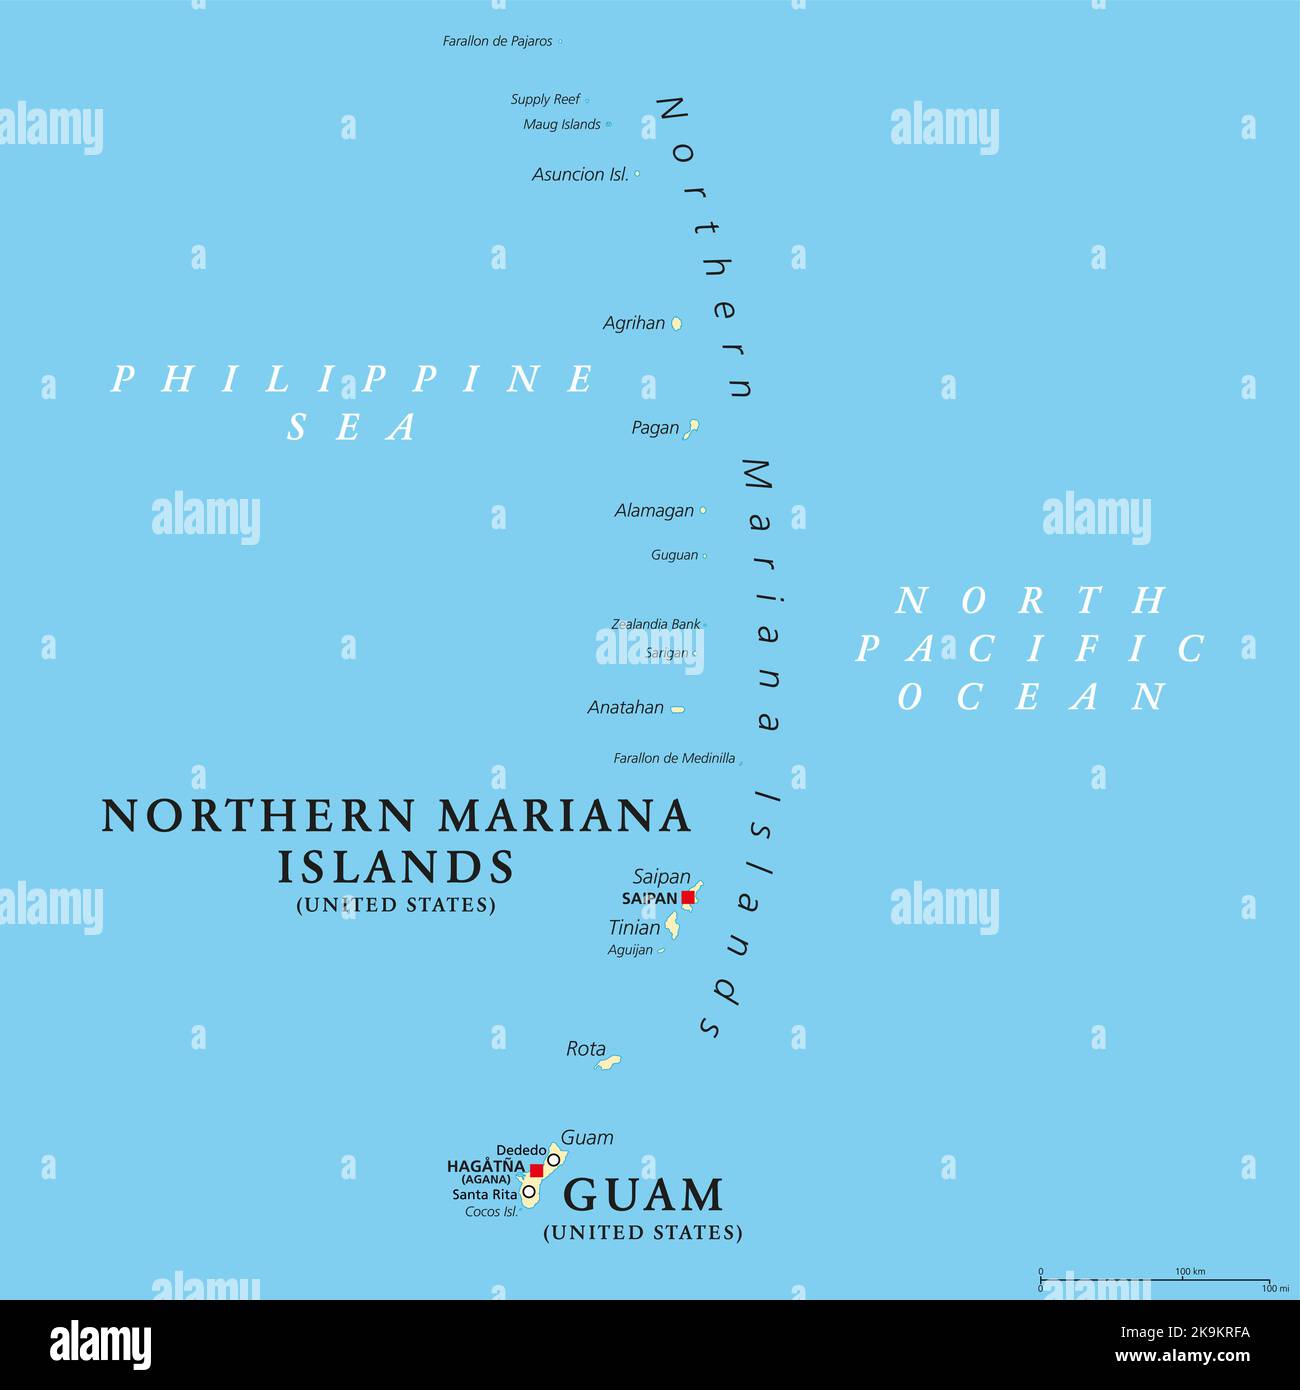 Guam and Northern Mariana Islands, political map. Two separate unincorporated territories of the United States of America in the Micronesia subregion. Stock Photo